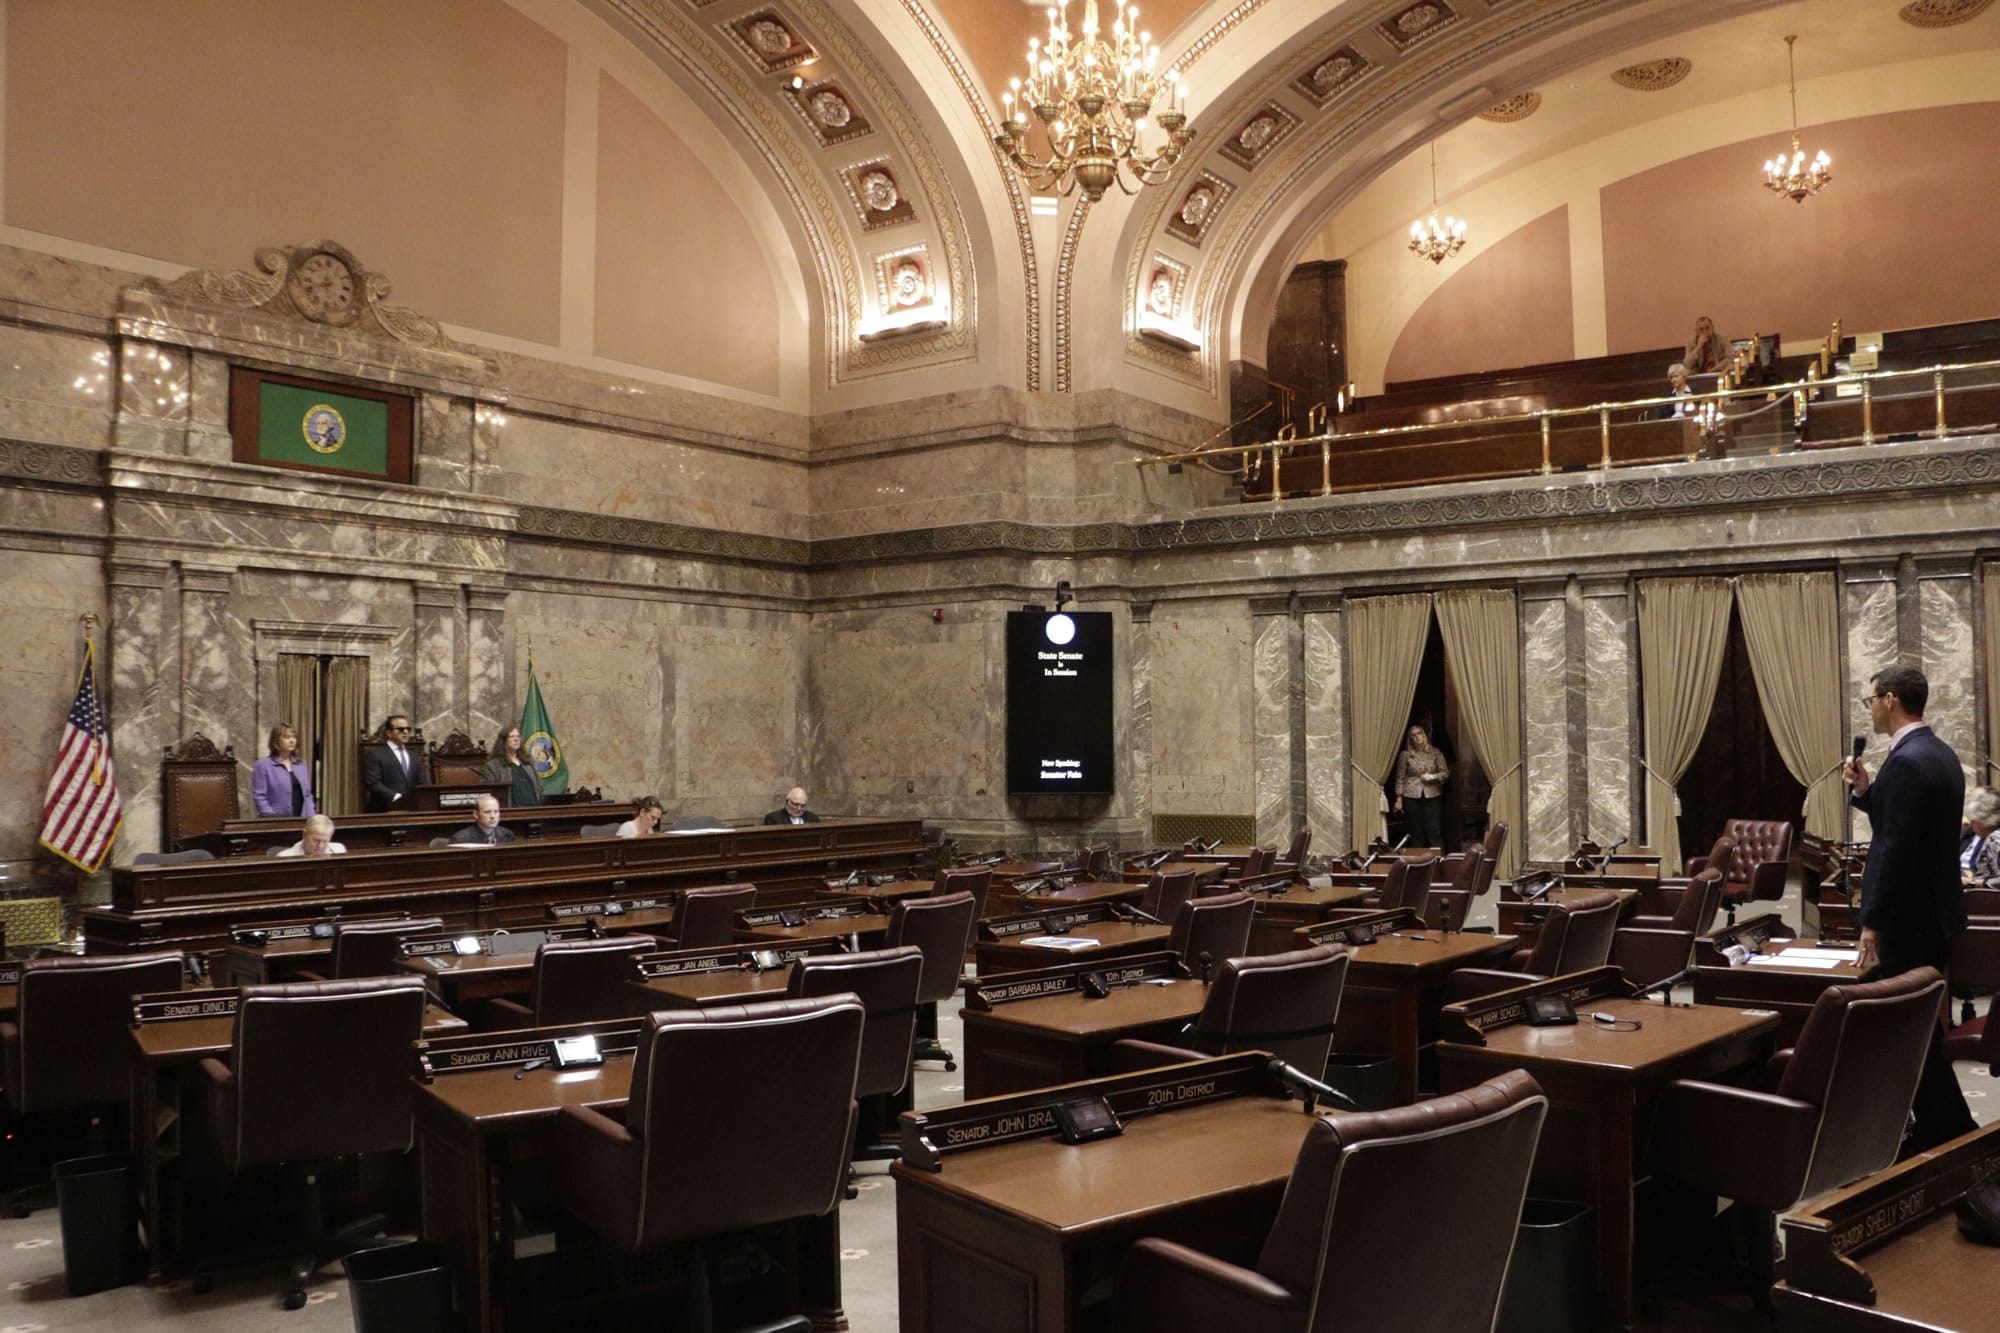 Republican Sen. Joe Fain, far right of frame, speaks in a mostly empty Senate chamber during adjournment of a 30-day special legislative session on Tuesday in Olympia. Gov. Jay Inslee immediately called the Legislature back for a second overtime session so that lawmakers can complete their work on the state budget.